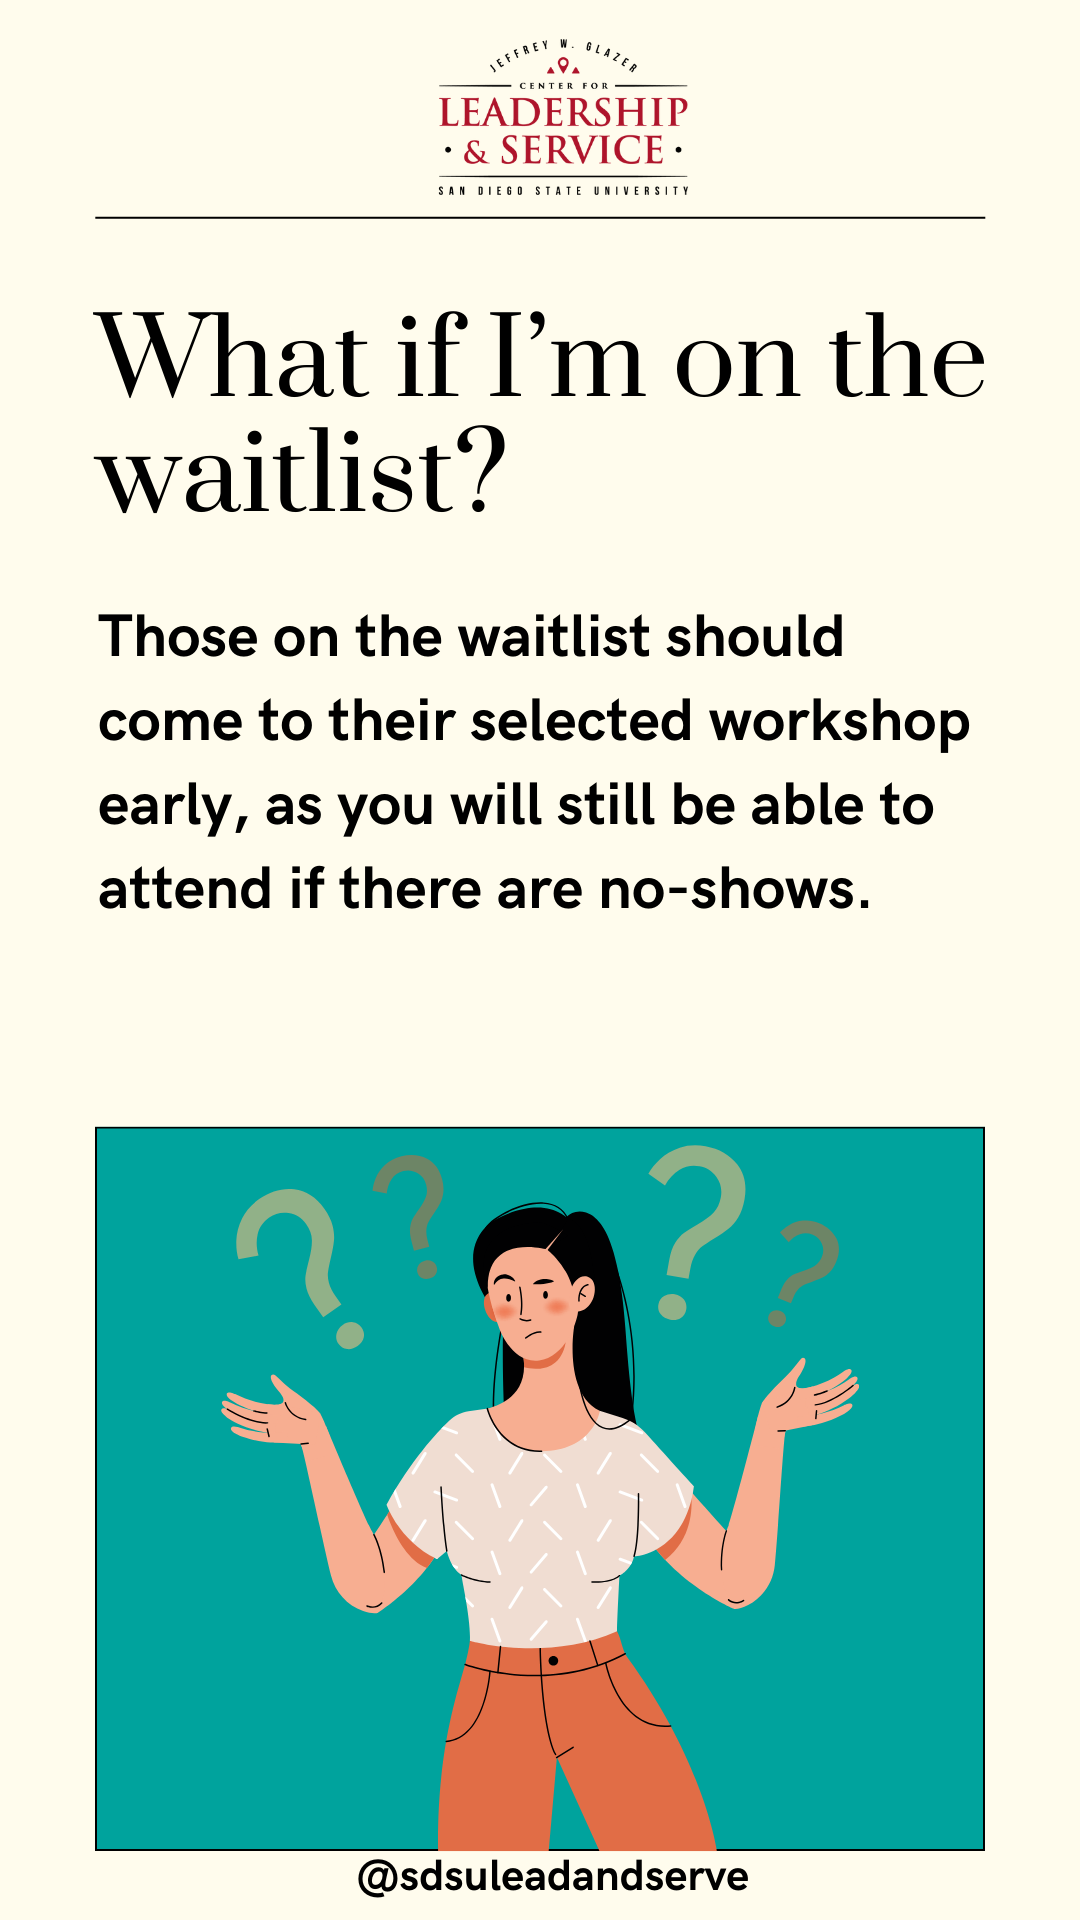 What if I'm on the waitlist? Those on the waitlist should come to their selected workshop early, as you will still be able to attend if there are no-shows.